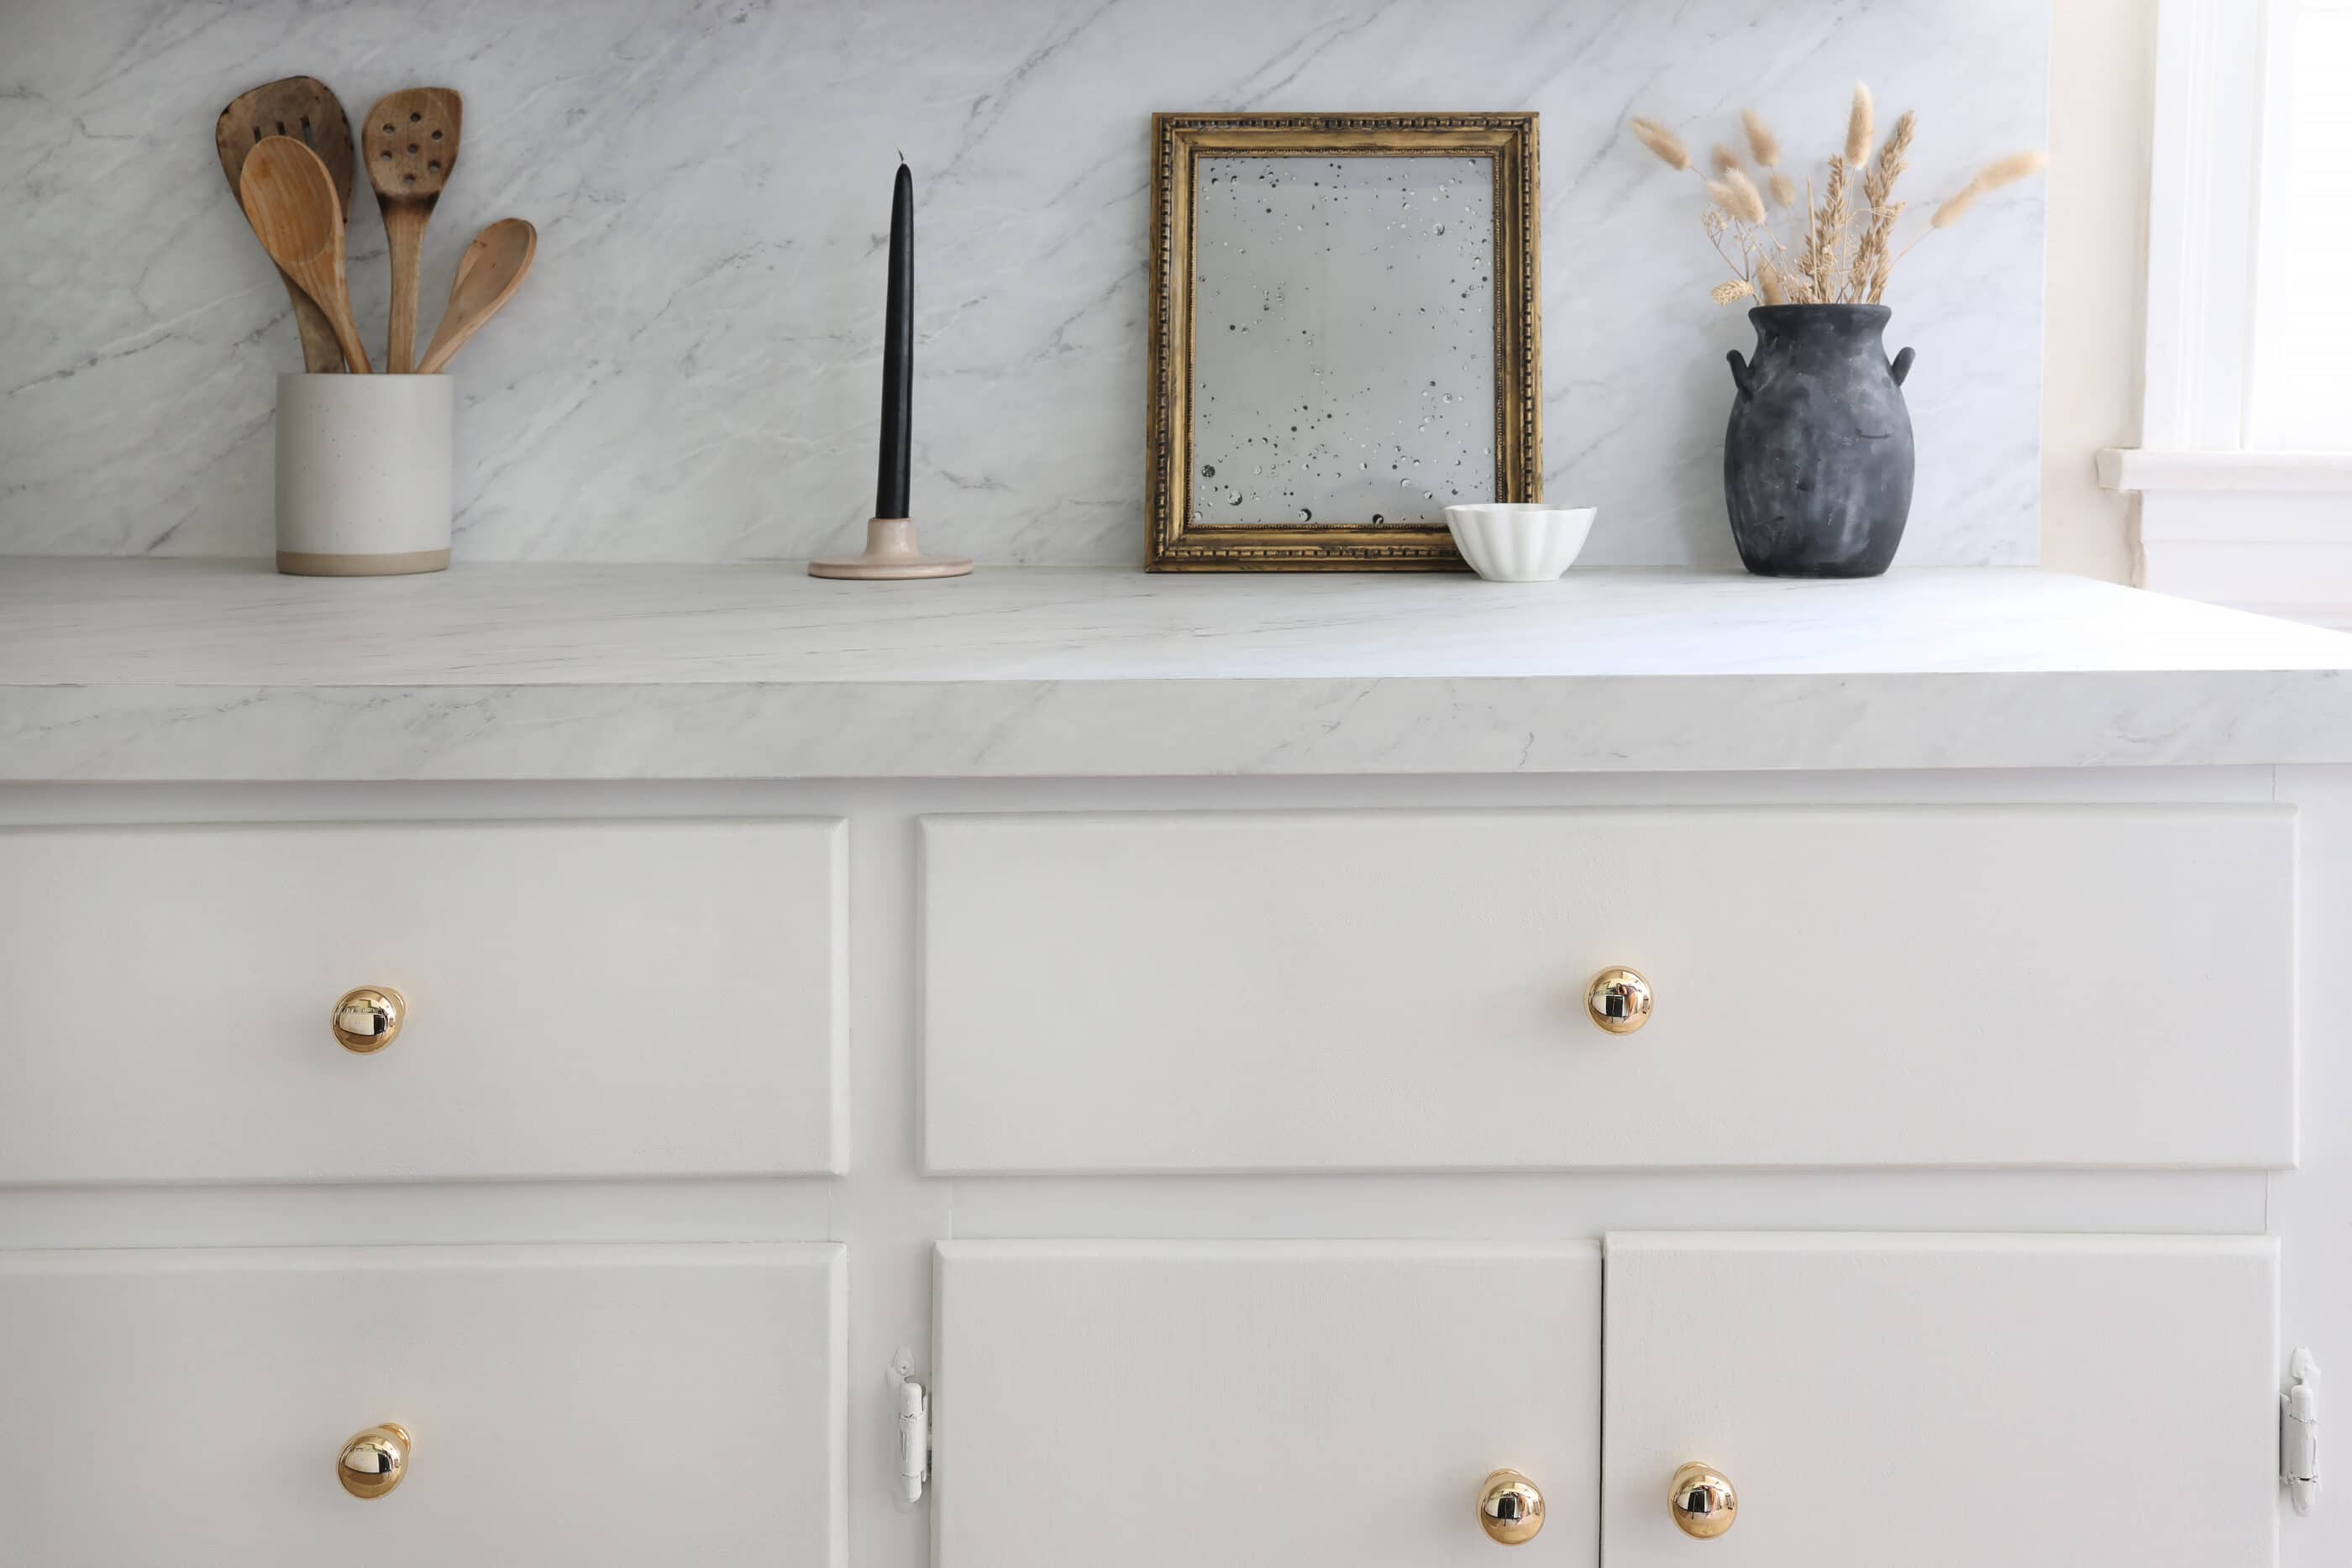 How To Make DIY Drawer Pulls from Just About Anything